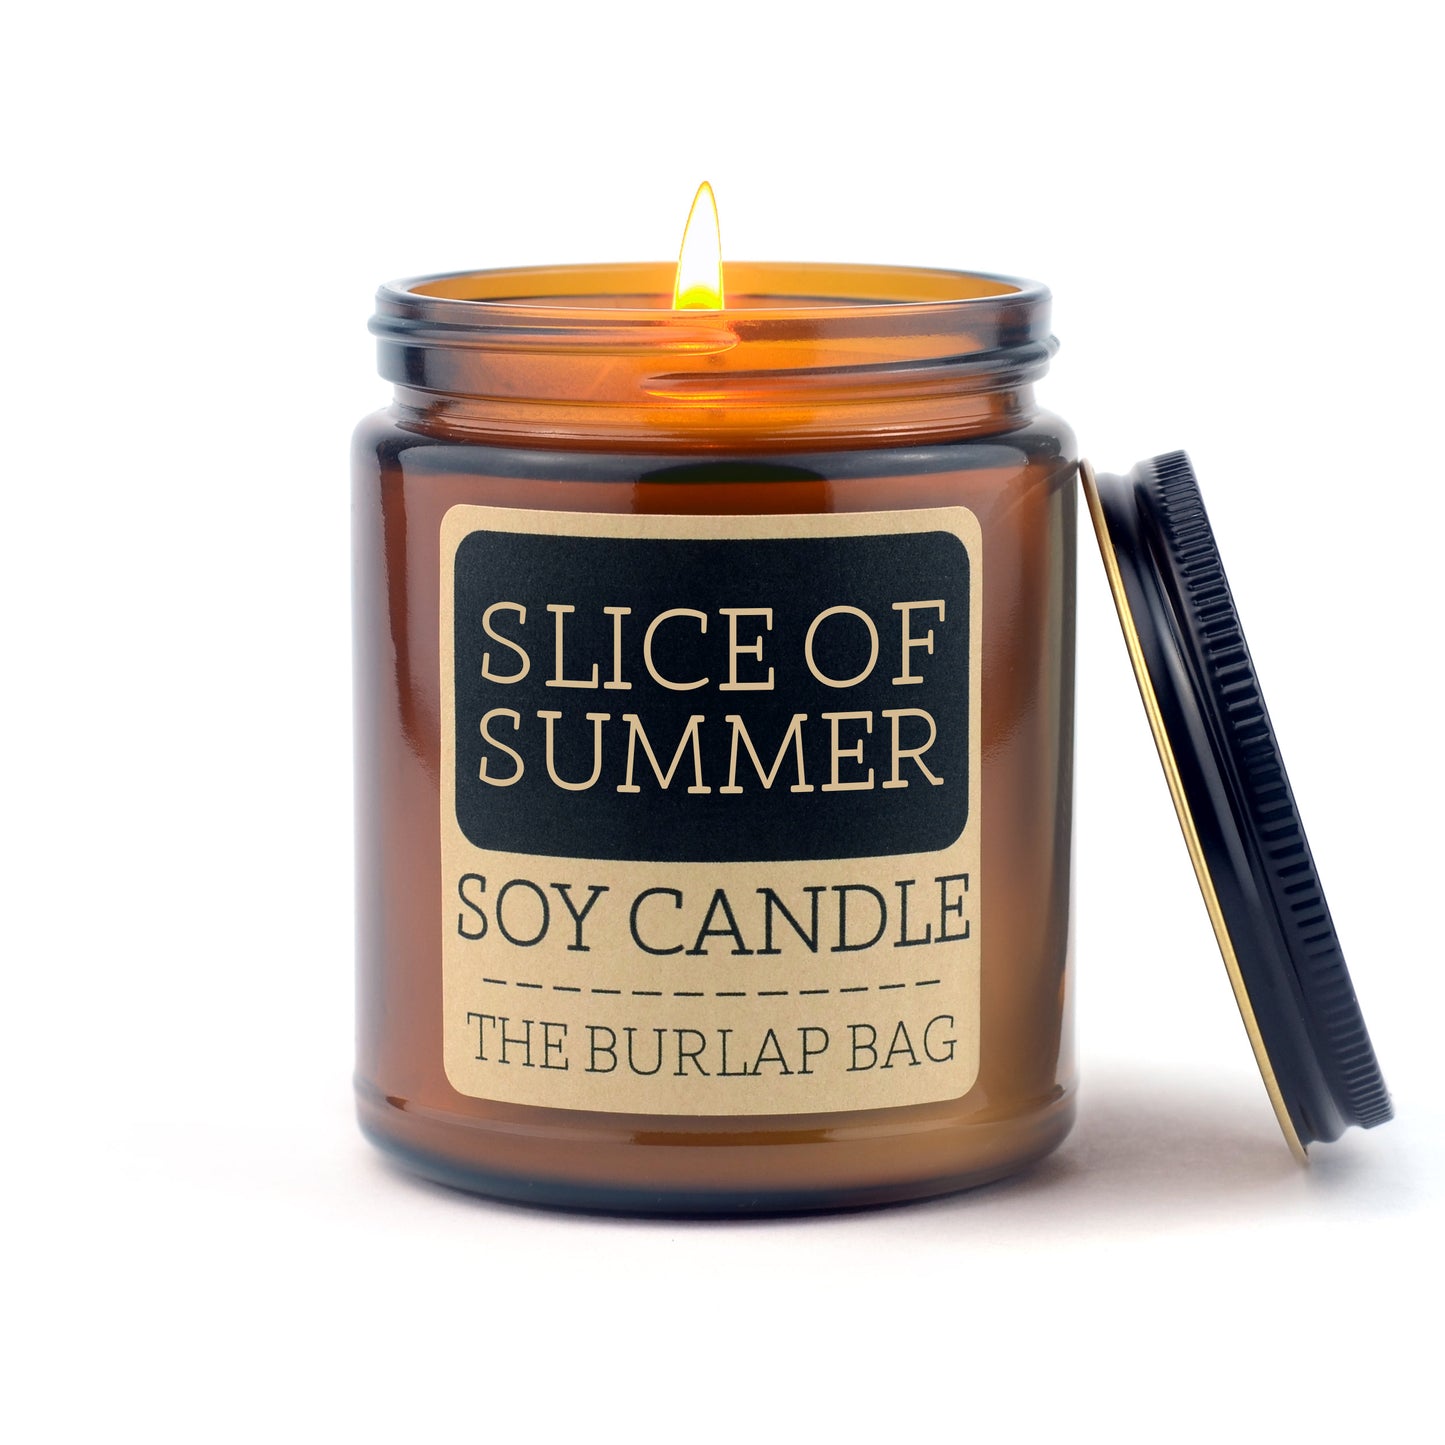 Slice of Summer - Soy Candle 9oz